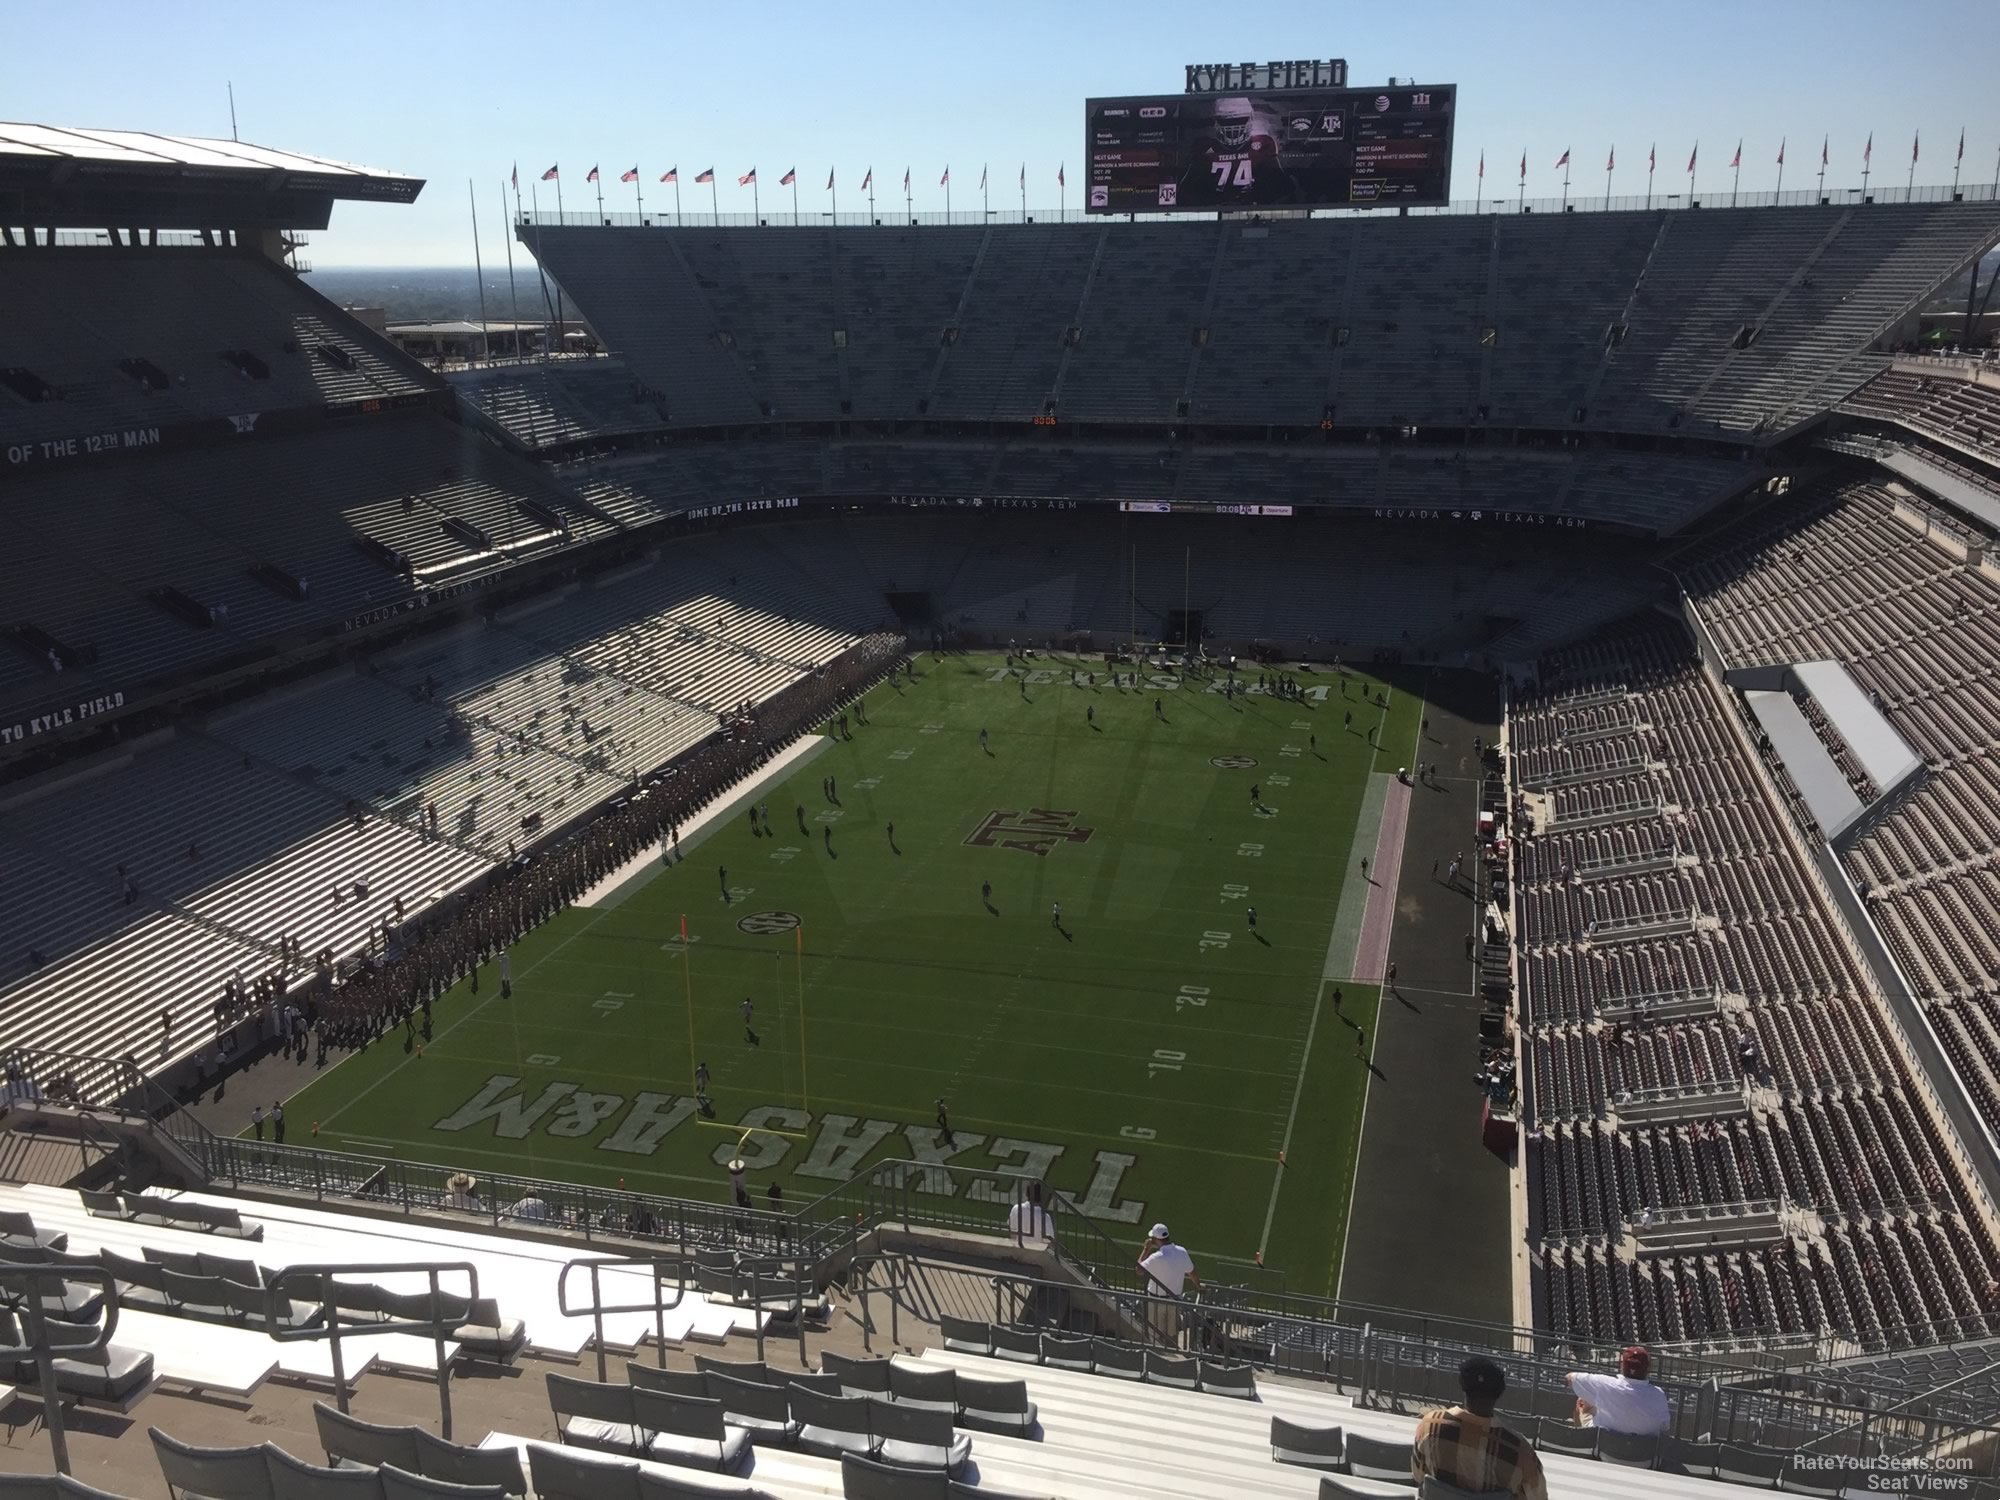 section 412, row 20 seat view  - kyle field